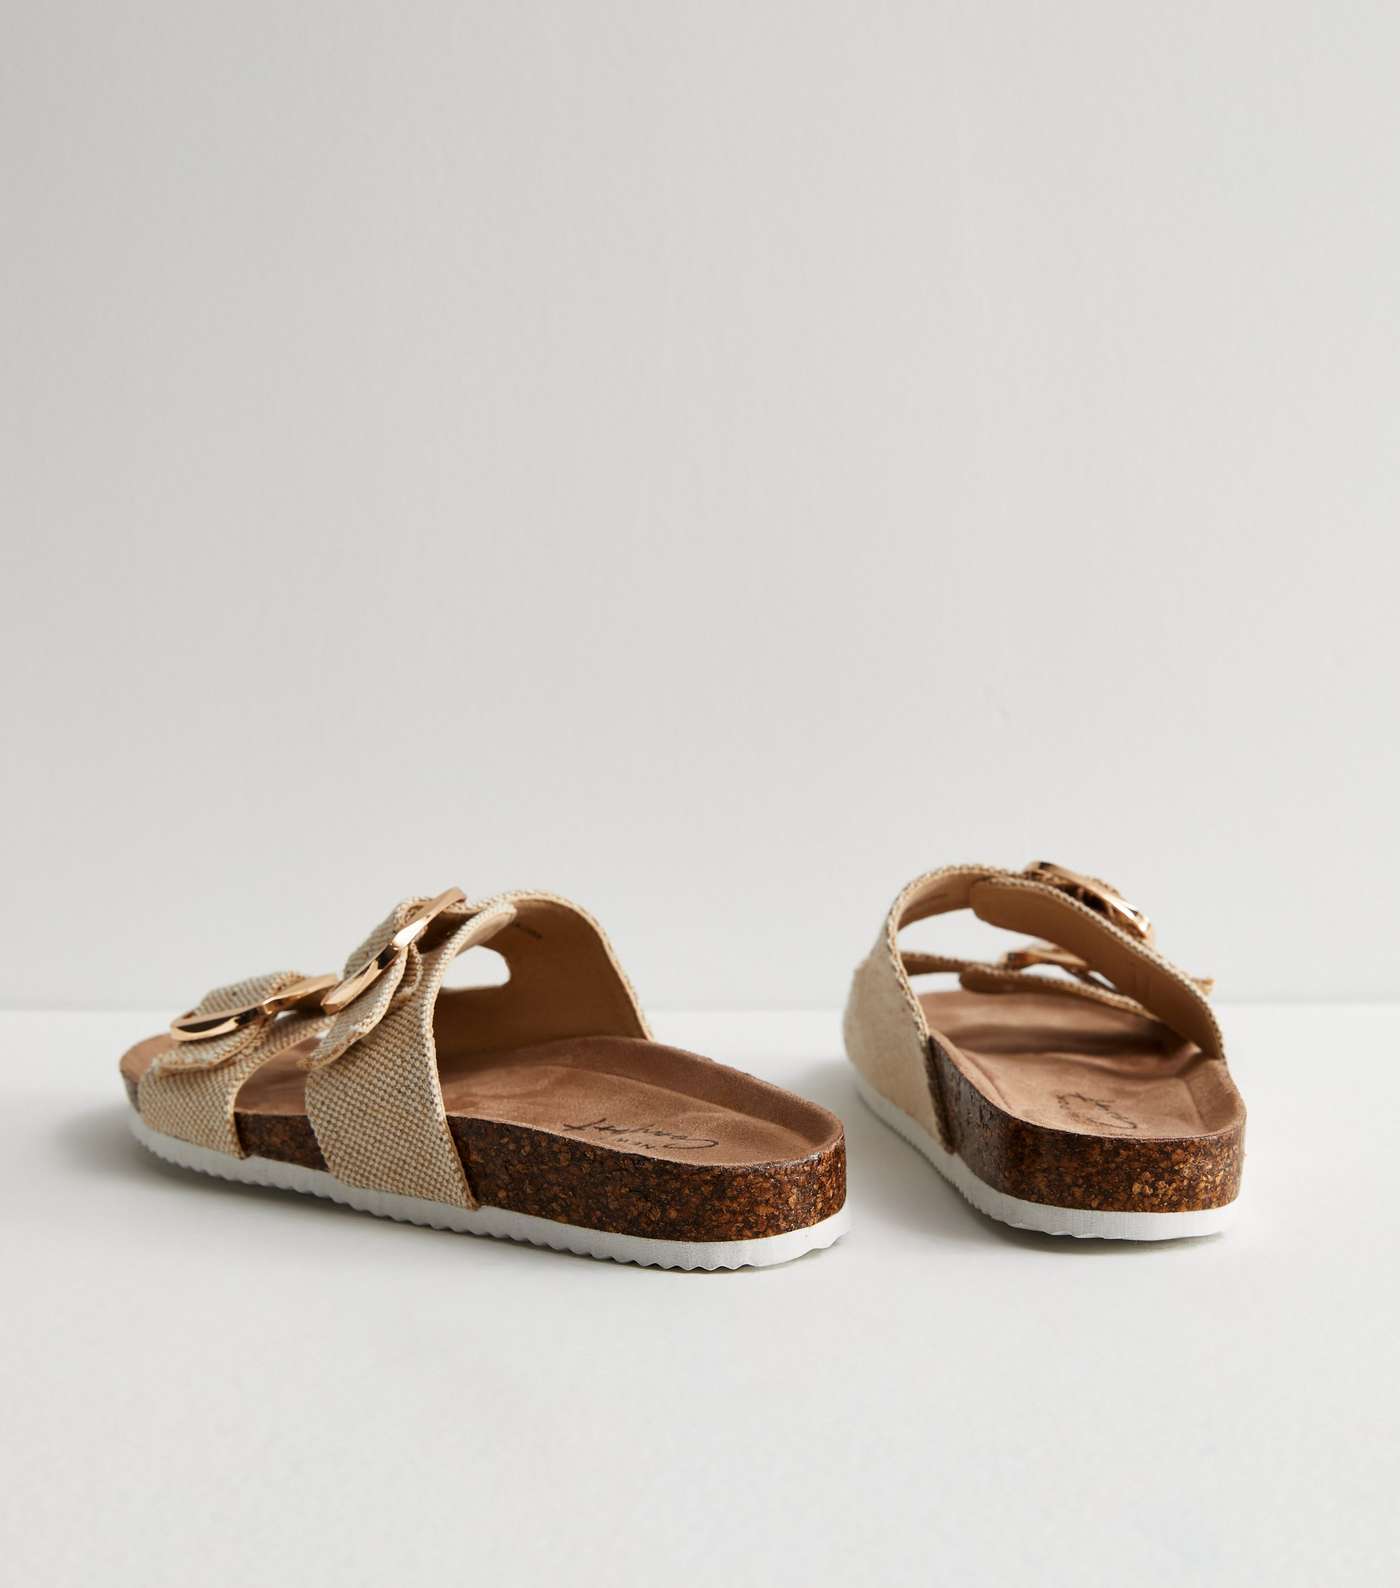 Off White Woven Buckle Footbed Sliders Image 4